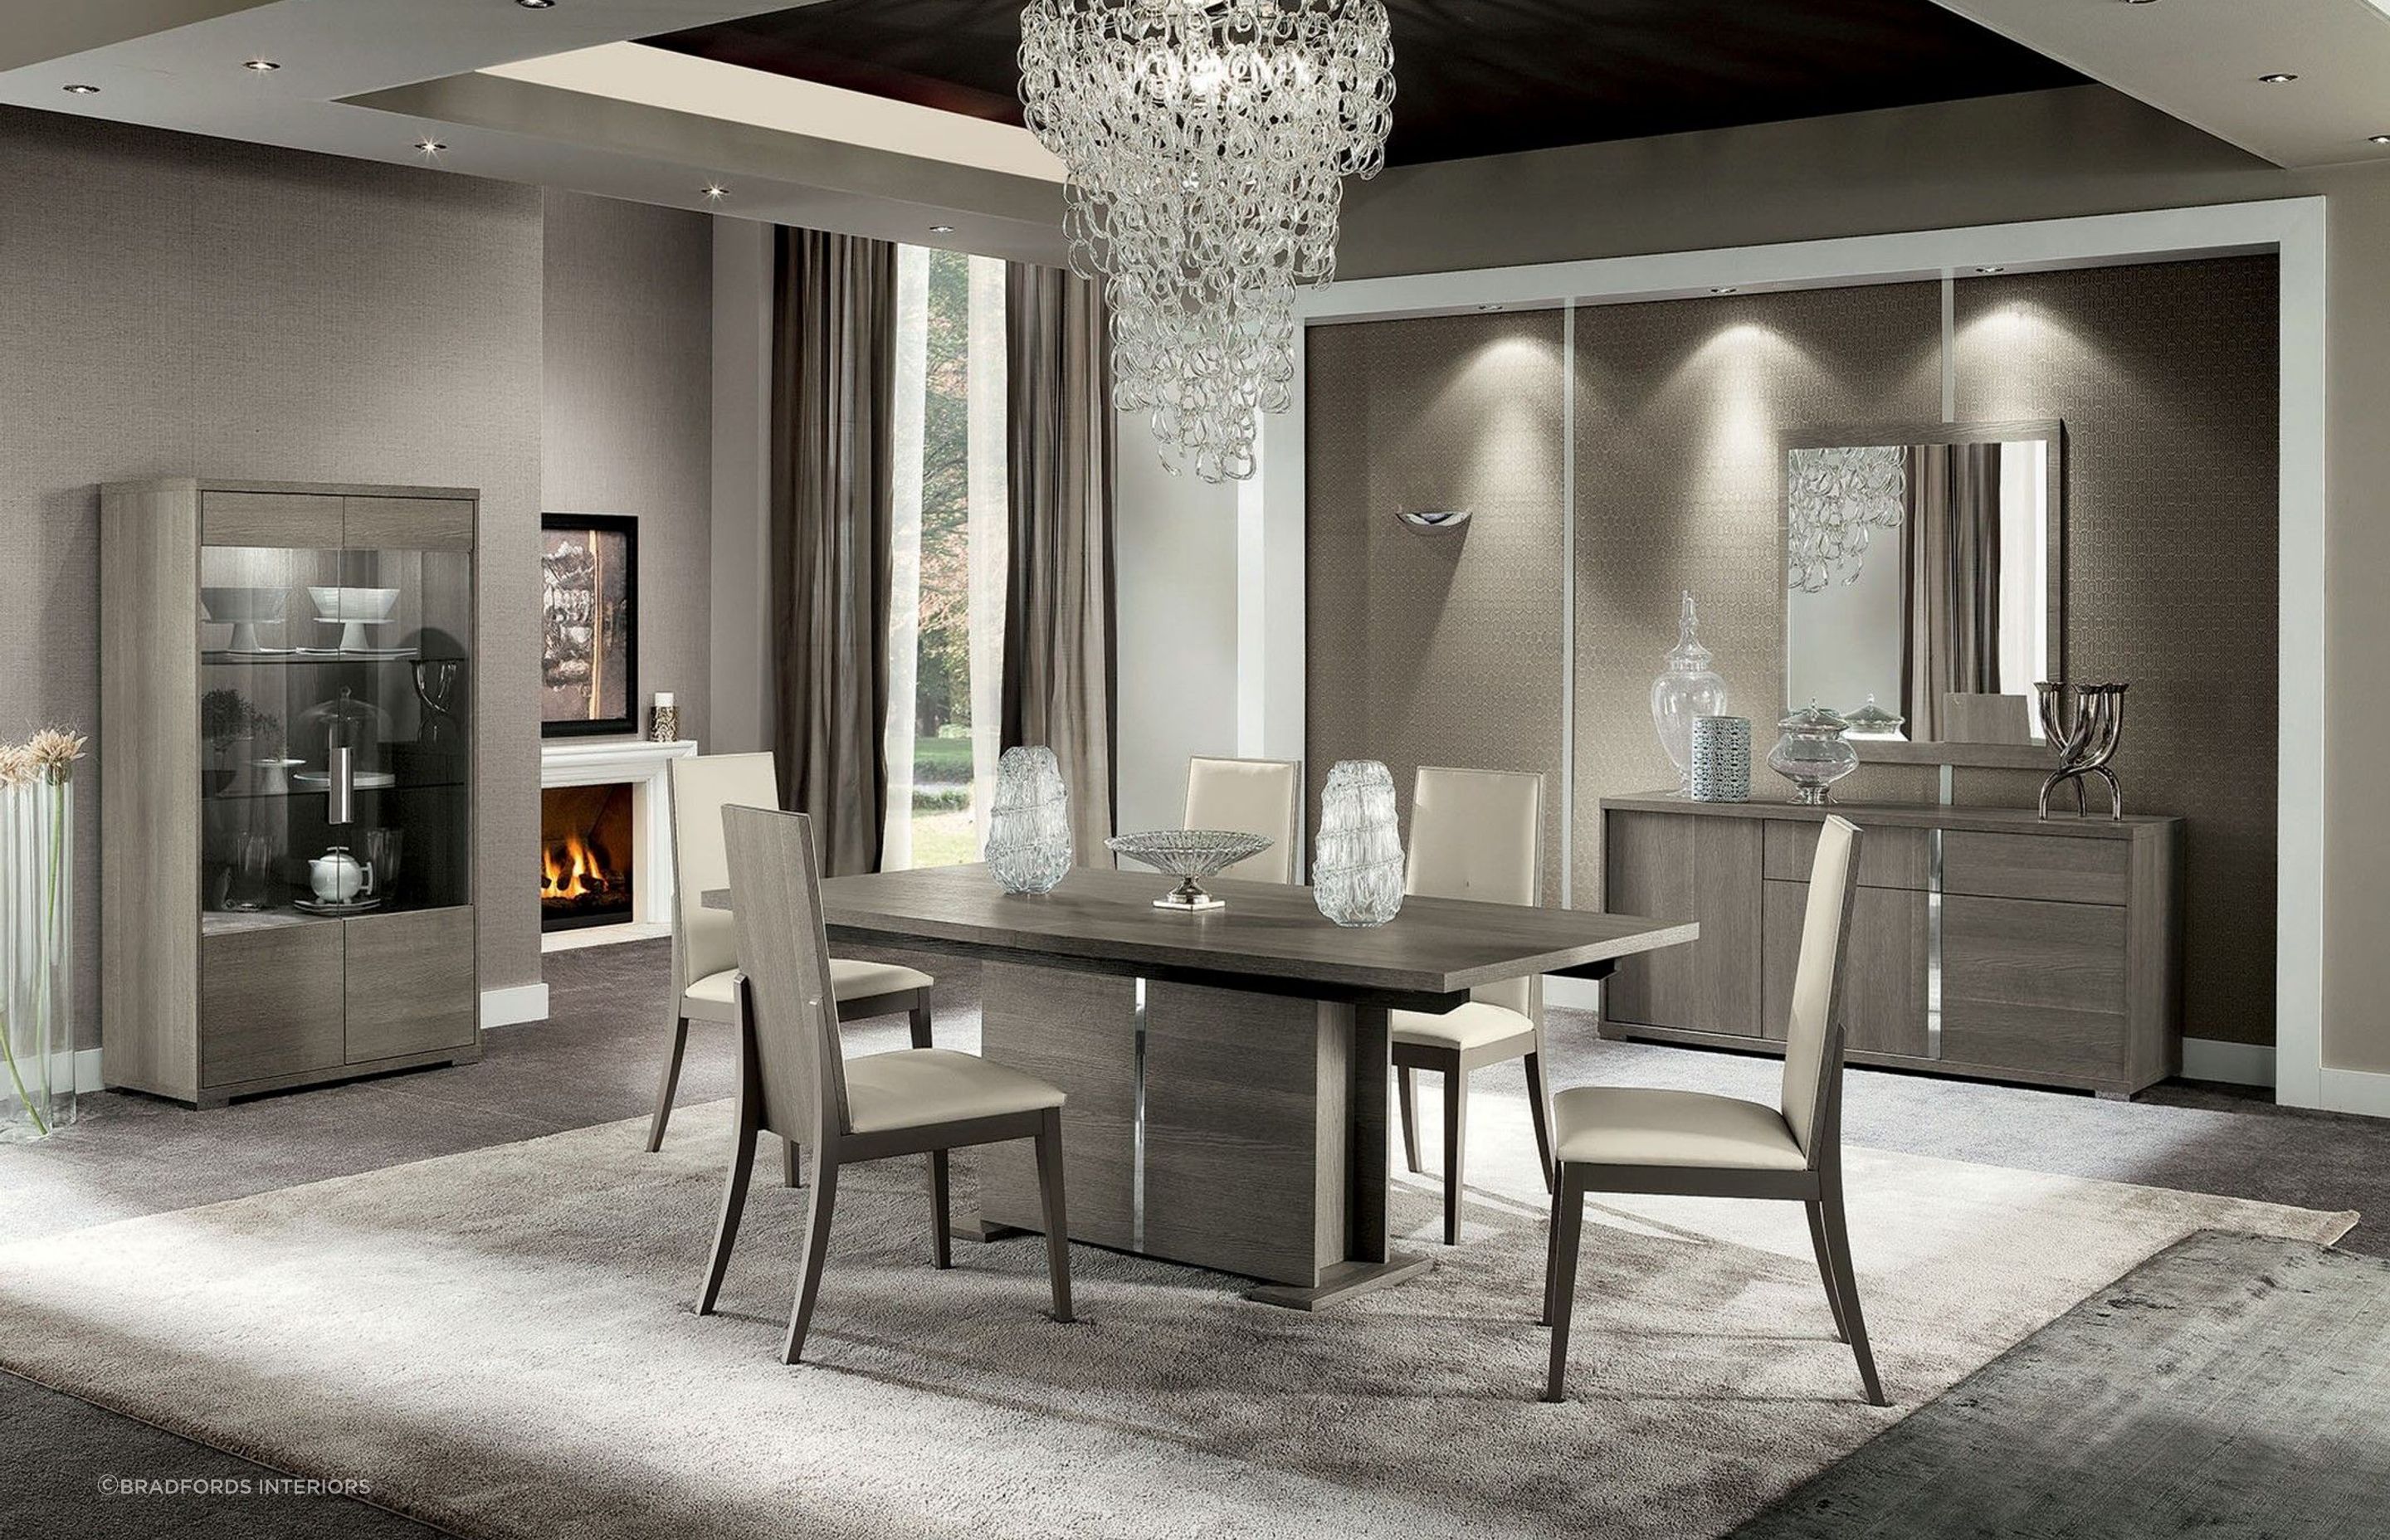 A floor rug can provide comfort, warmth and help define a dining space, seen here with the elegant Tivoli Dining Table by Alf Italia.